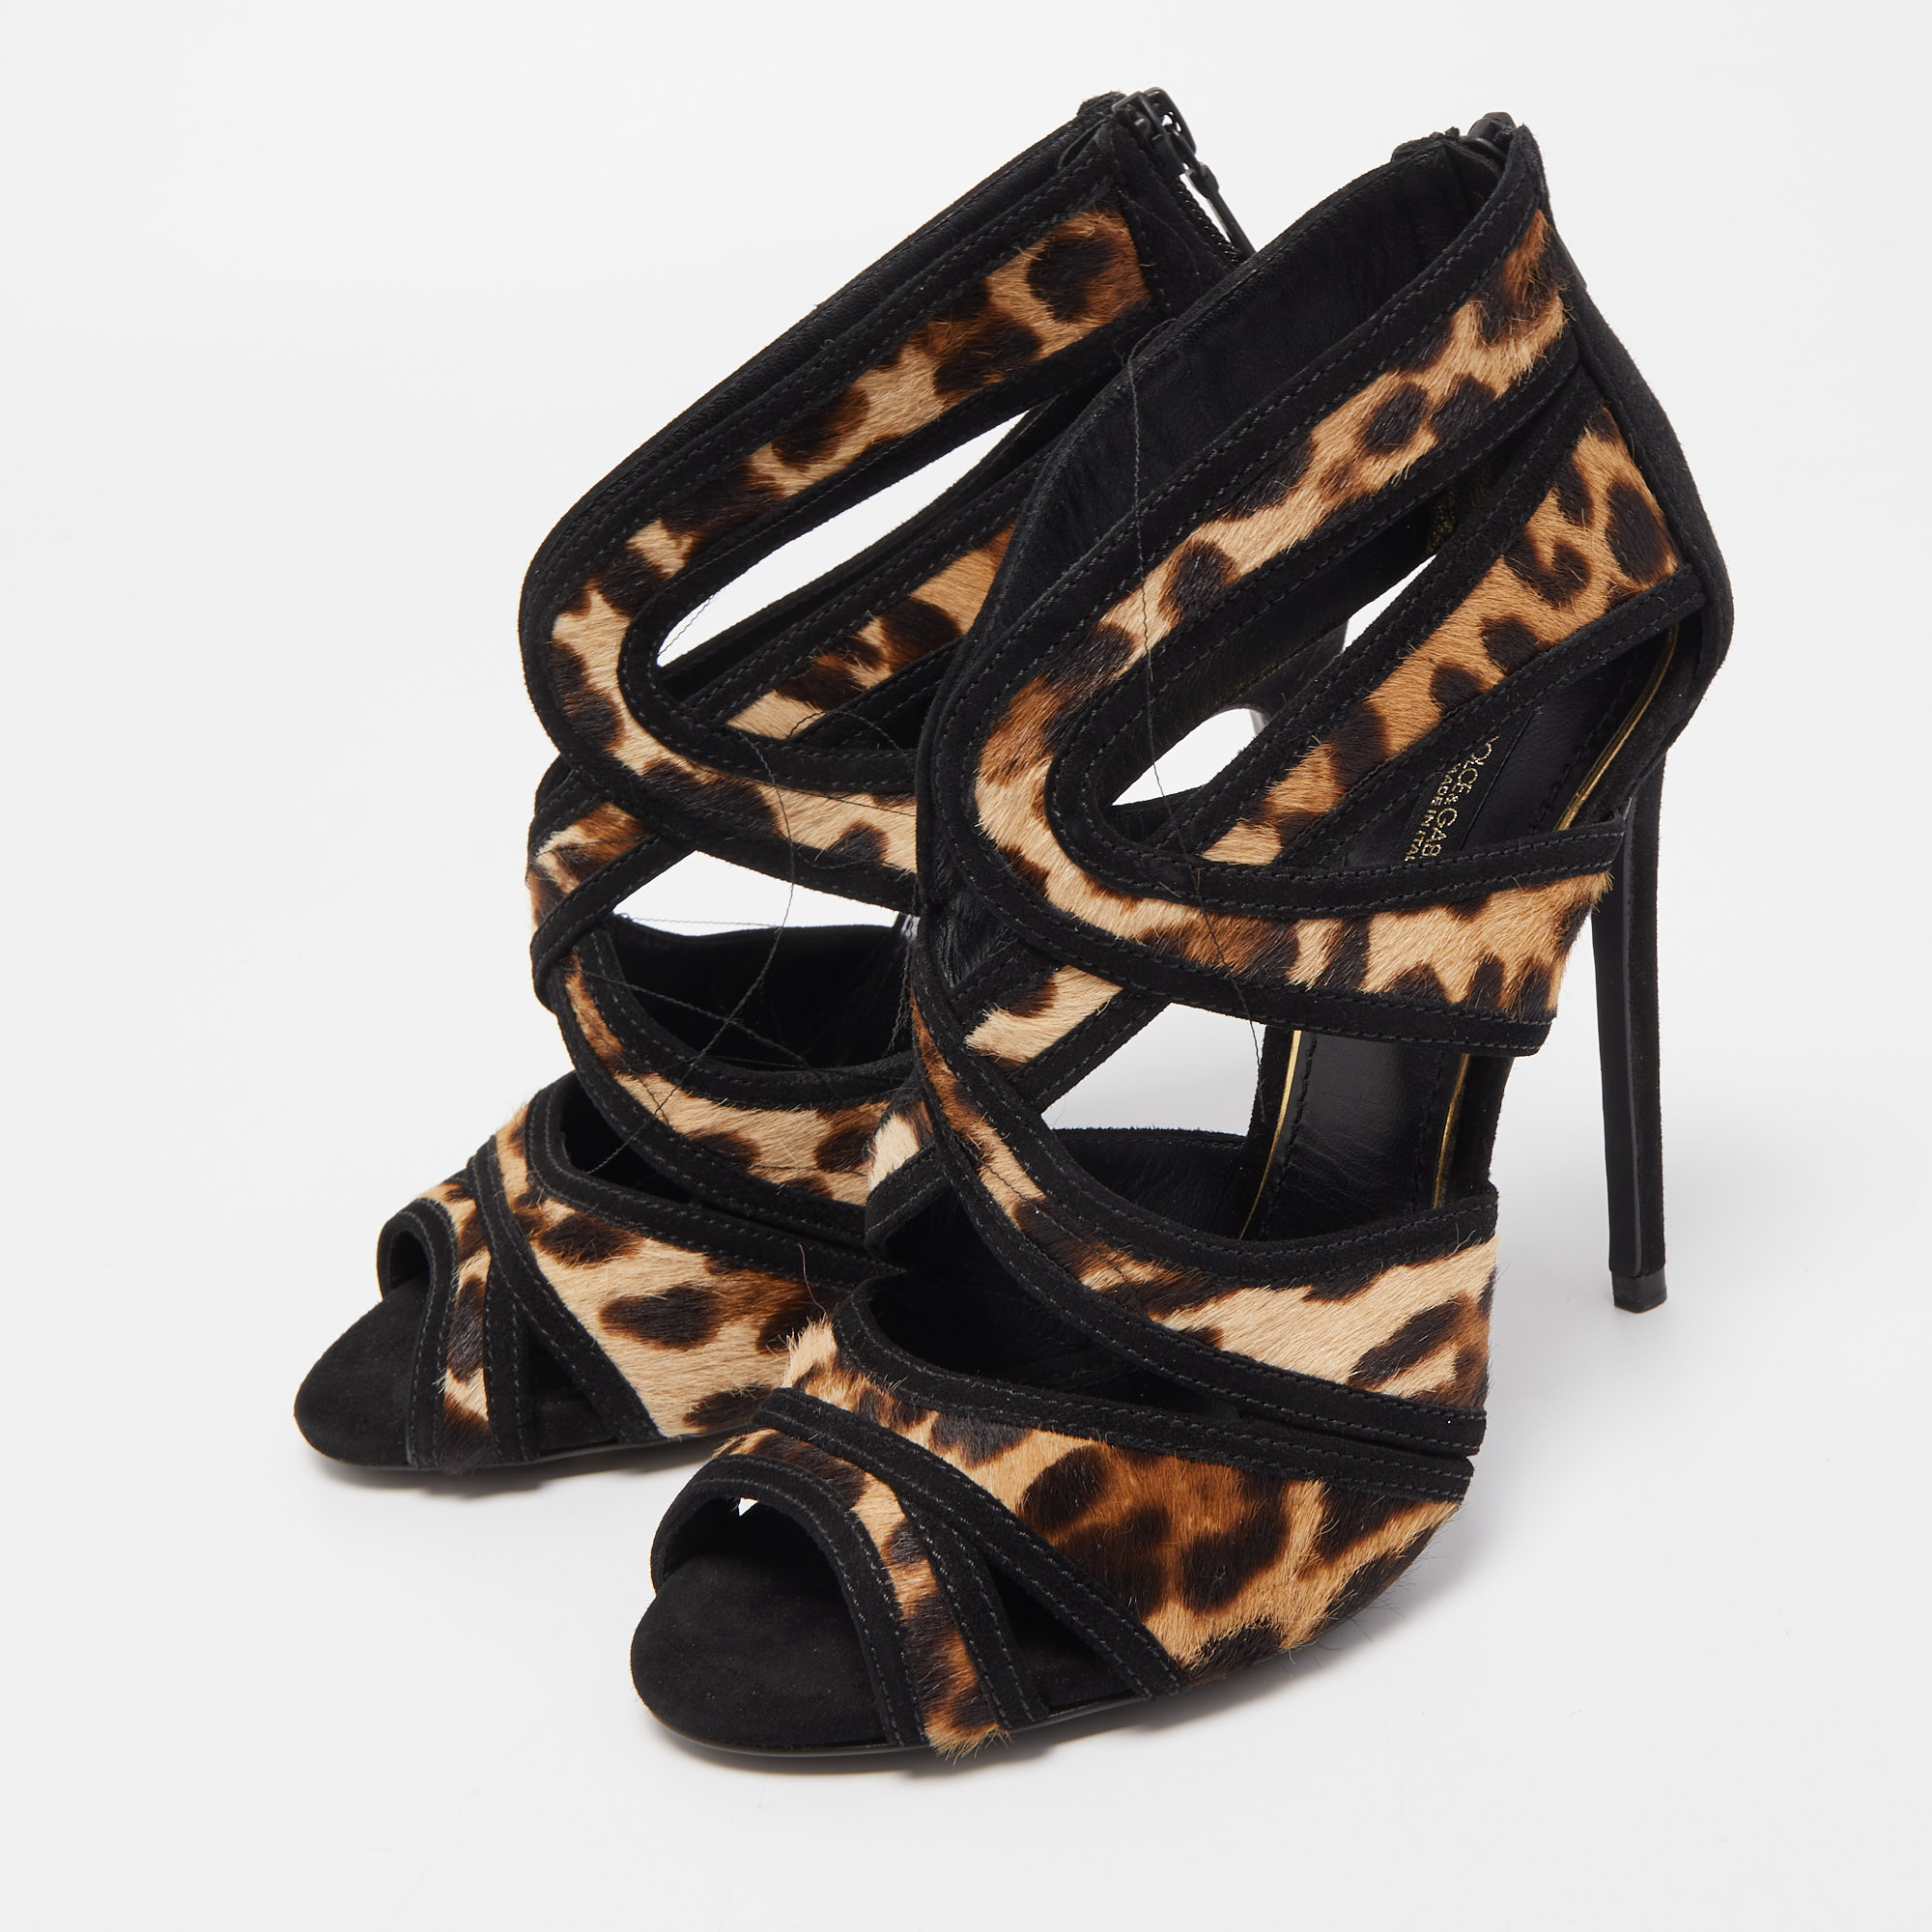 

Dolce & Gabbana Black/Brown Leopard Print Calf Hair and Suede Strappy Ankle Sandals Size